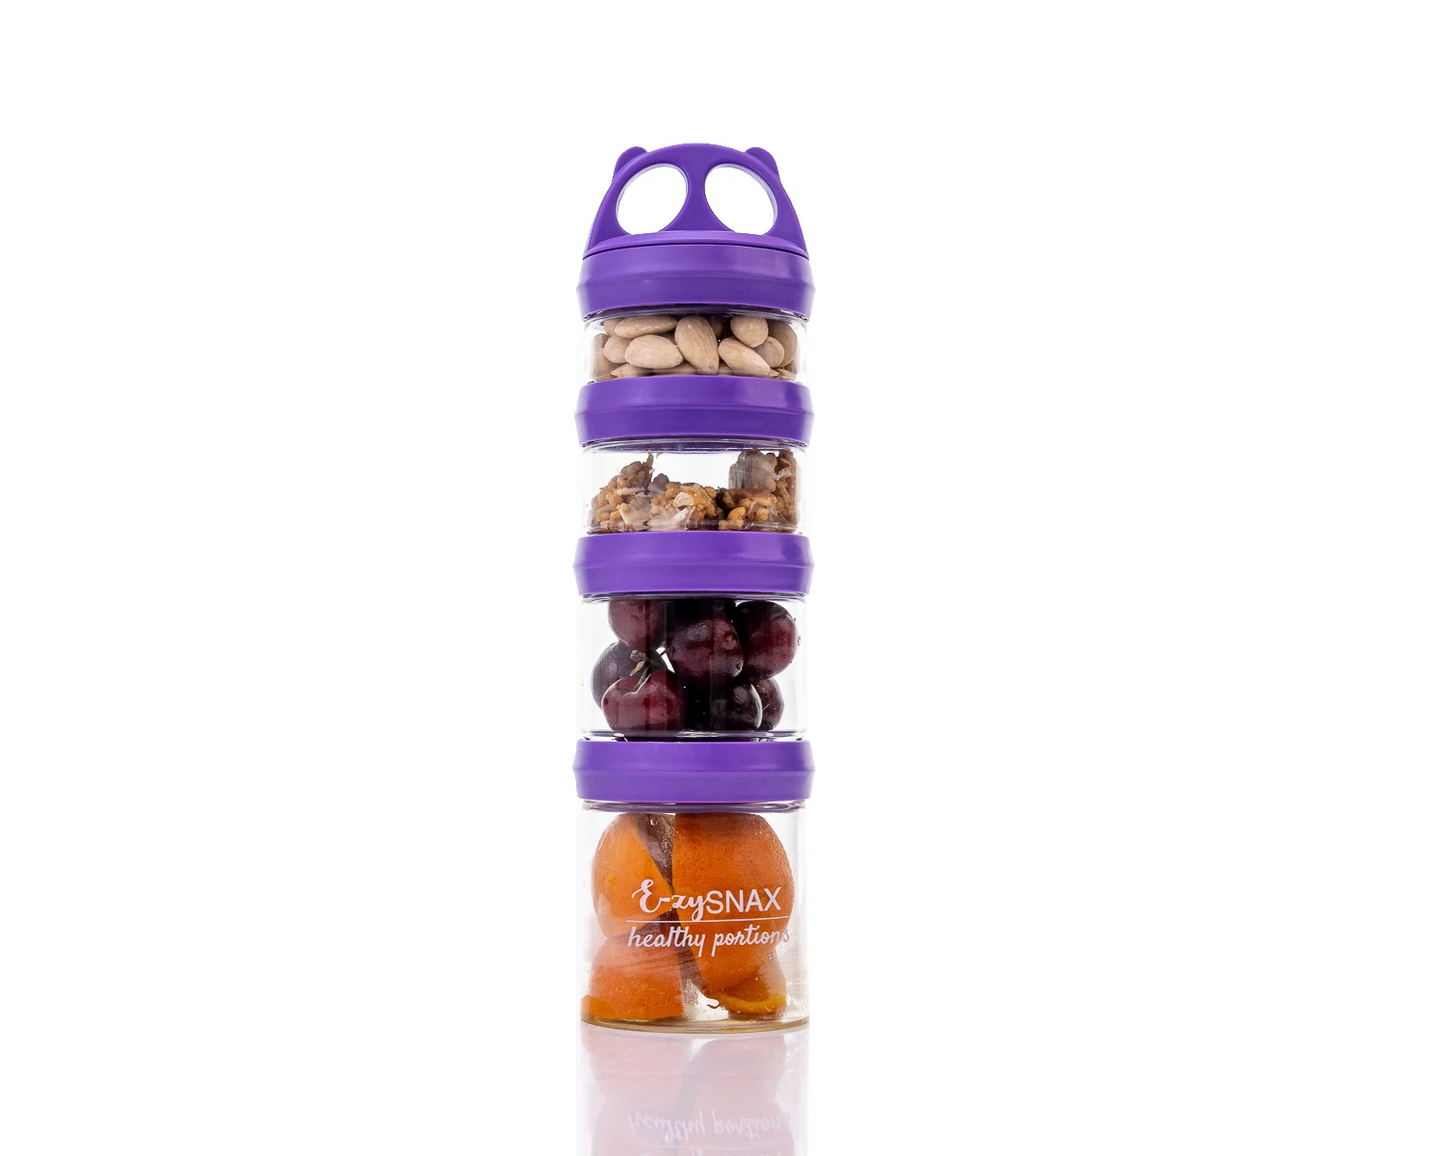 E-zy Snax - Stackable Lunch Box - 4 Cylindrical Containers